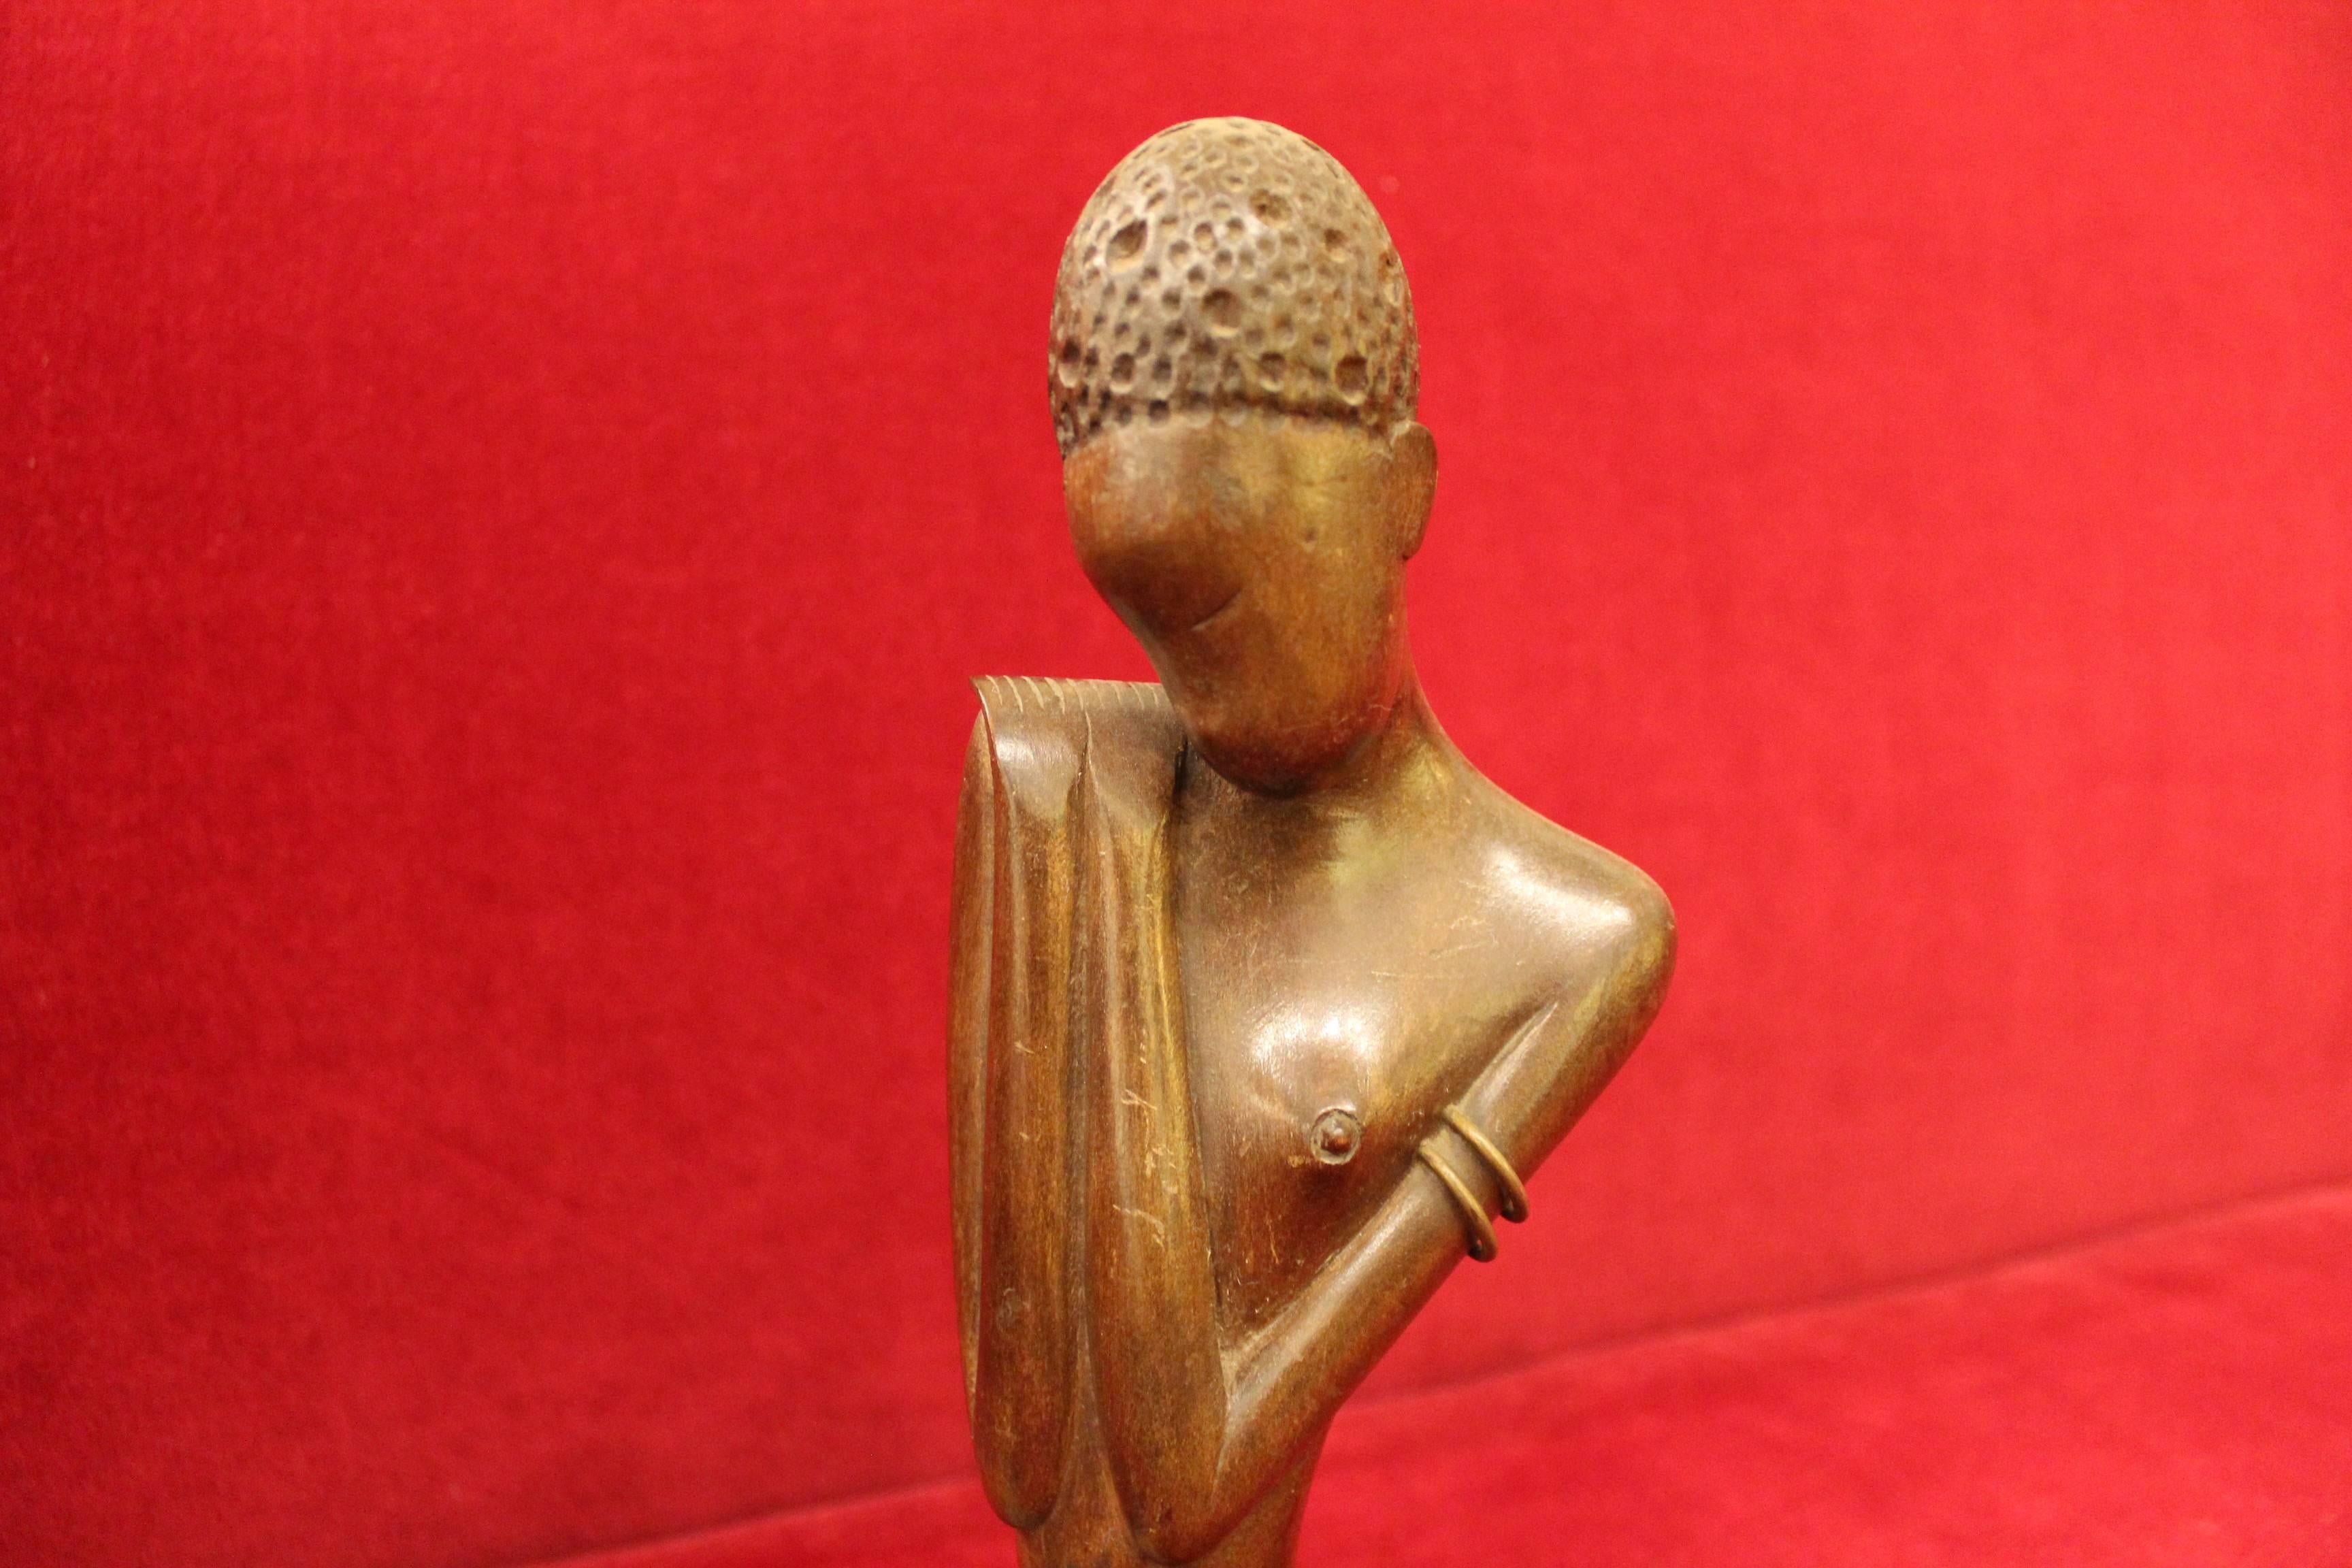 Look at her! Werkstatte Hagenauer Wein (wHw) African Woman, signed and lovingly craved with precious woods! This design is said to be one of the rarest African figurines by the Hagenauer brothers, and if you follow An orange moon, you know we are